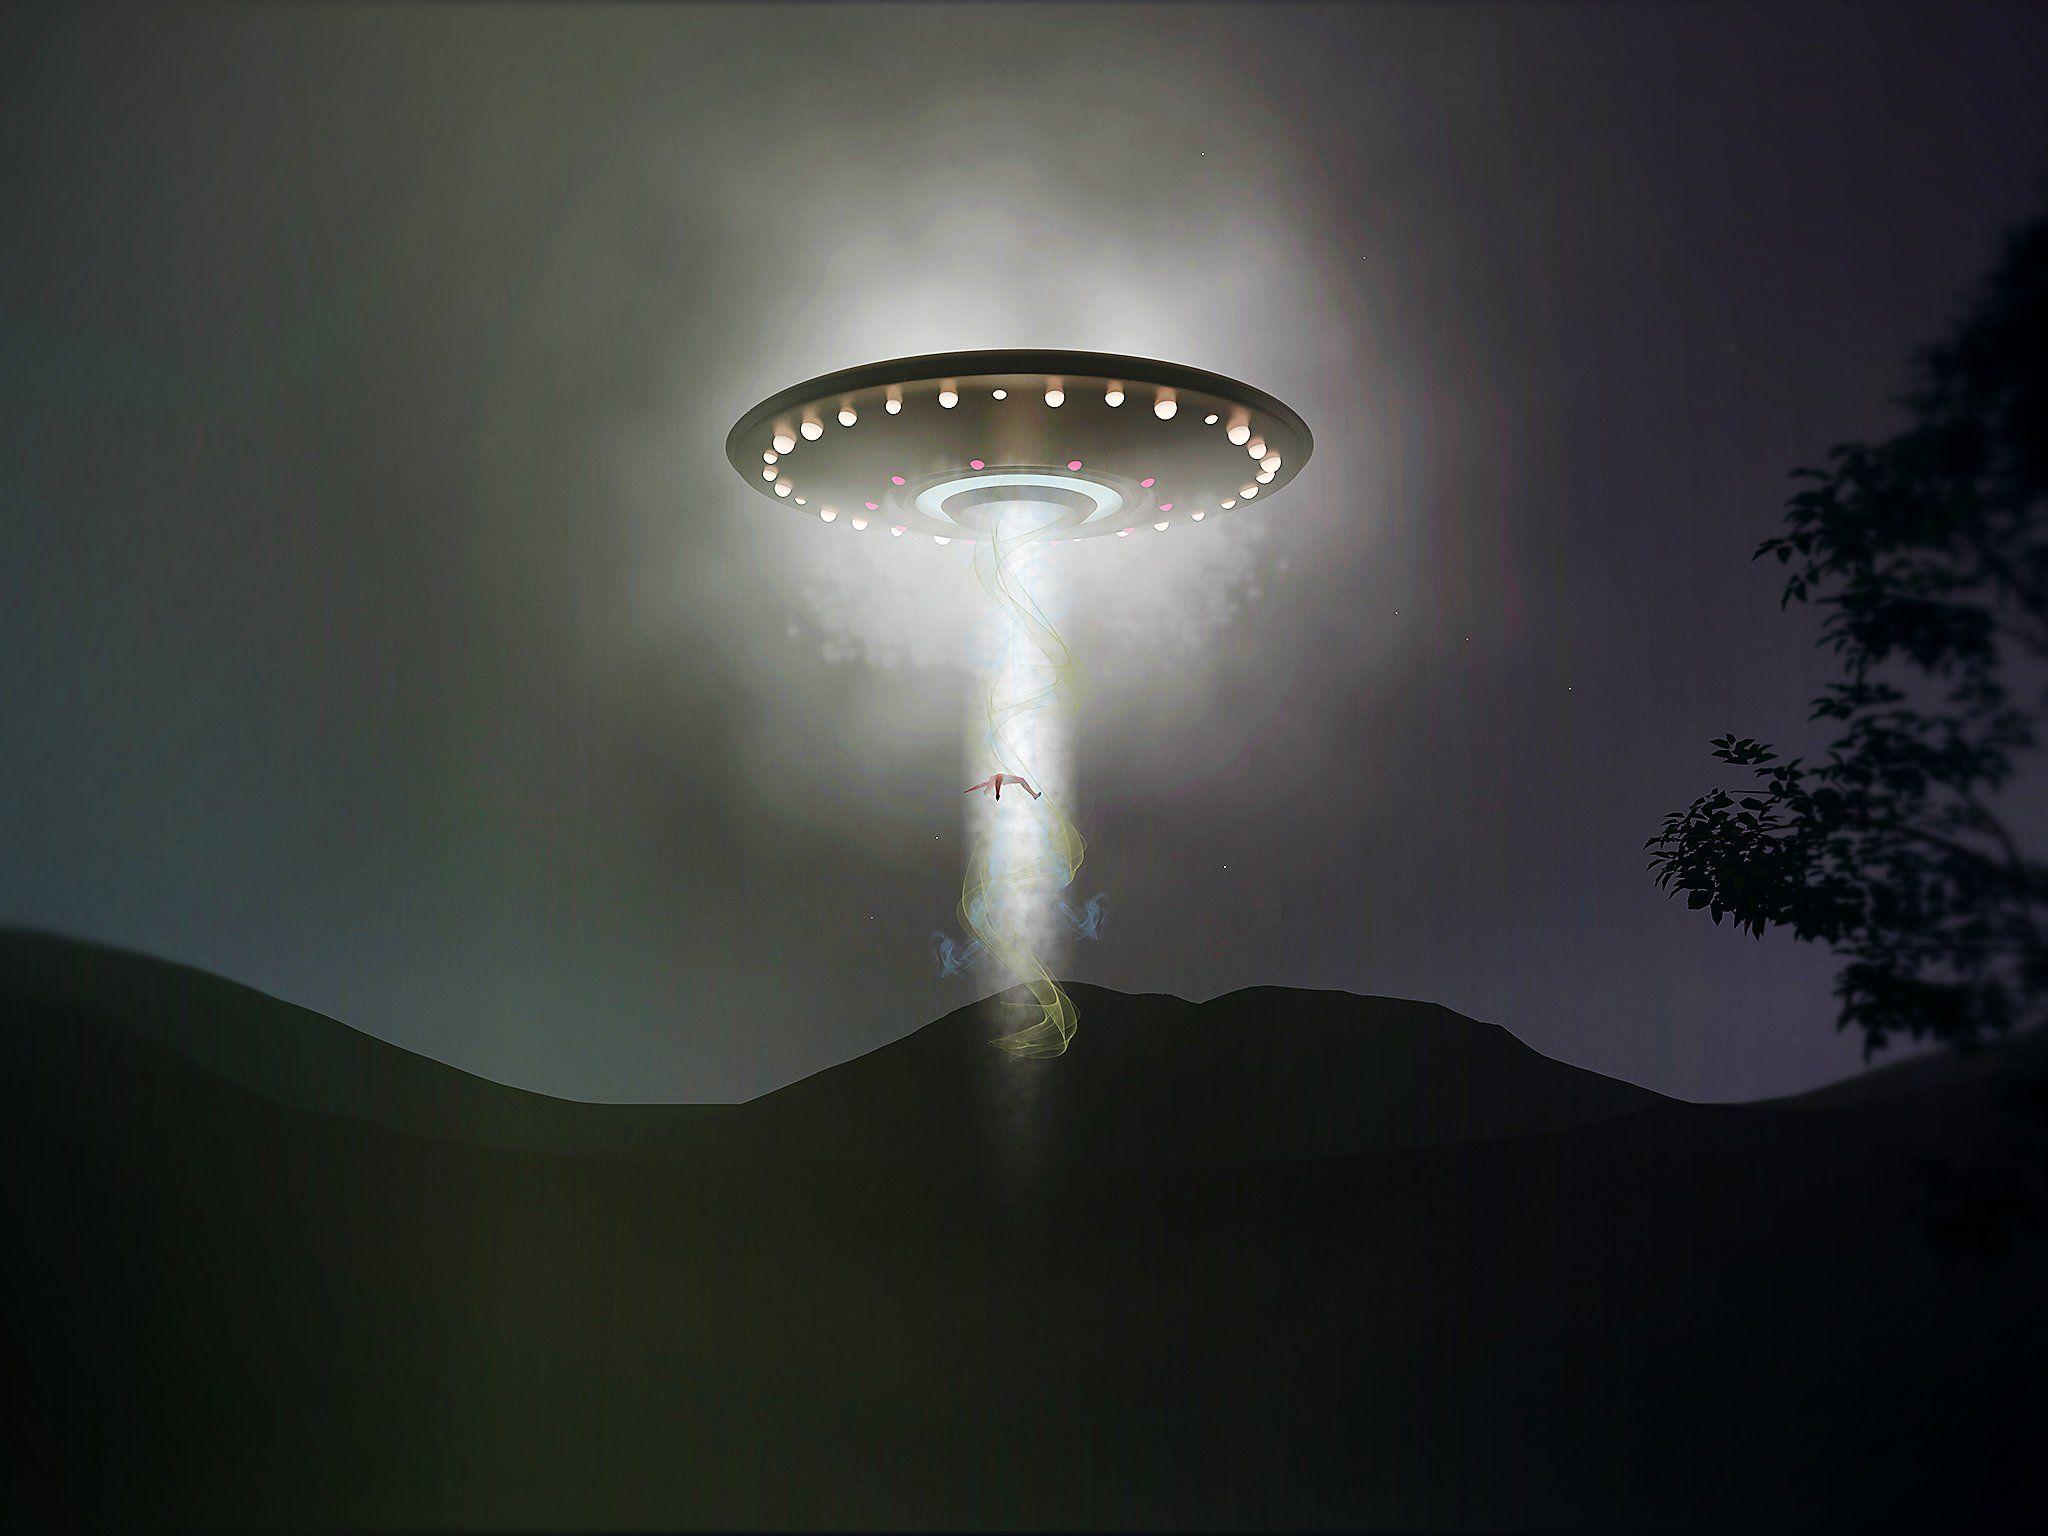 Some scientific explanations for alien abduction that aren't so out